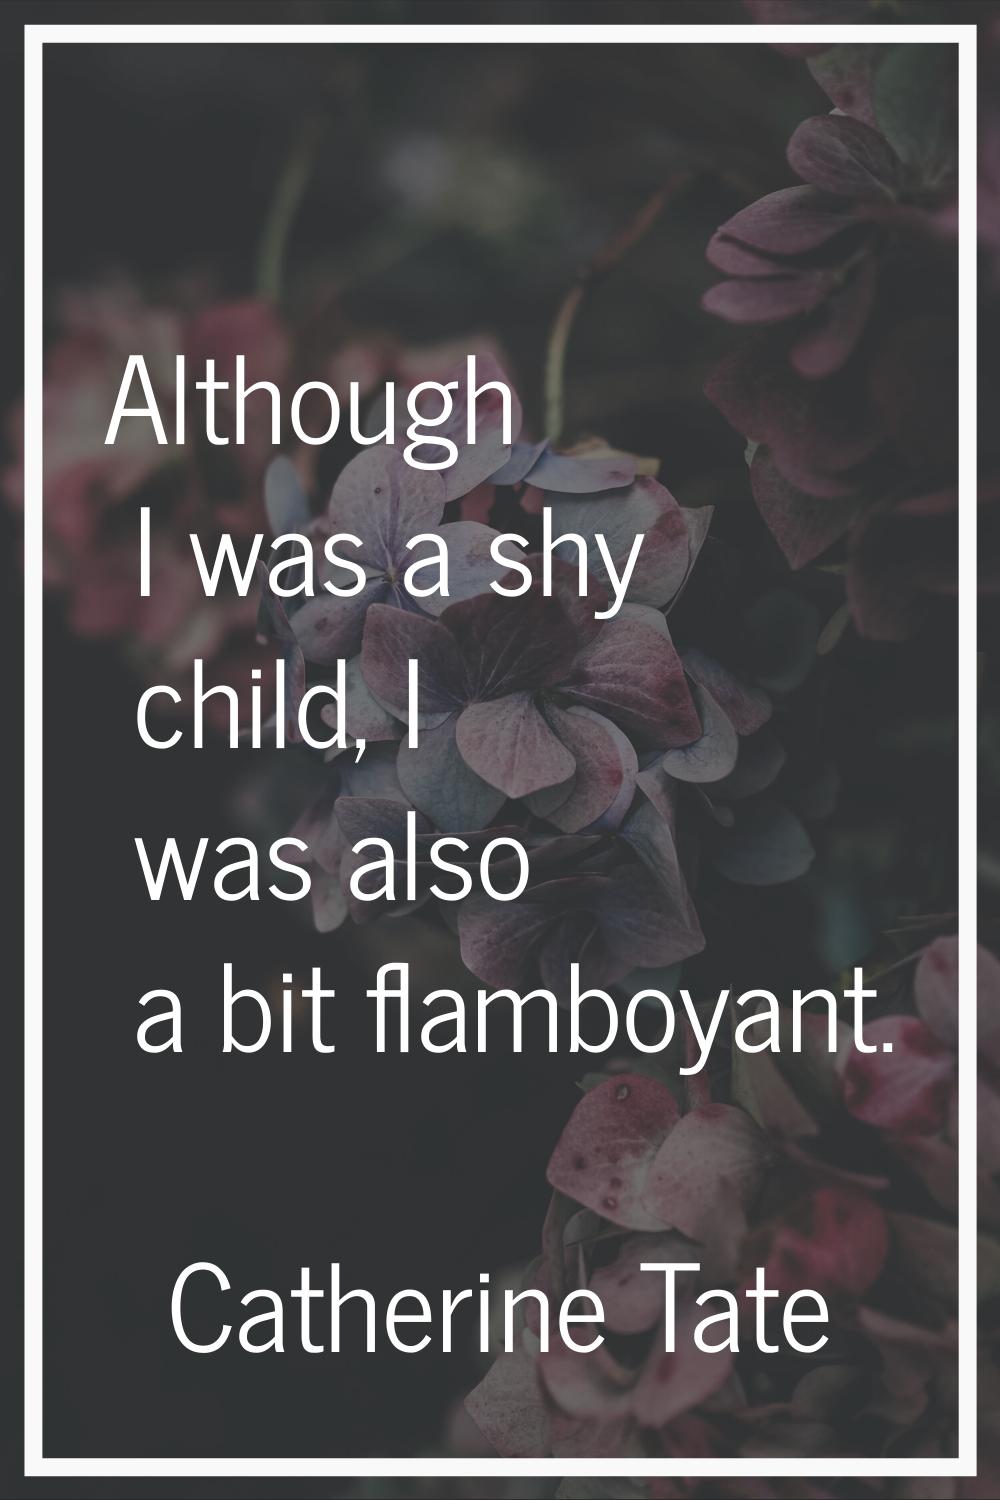 Although I was a shy child, I was also a bit flamboyant.